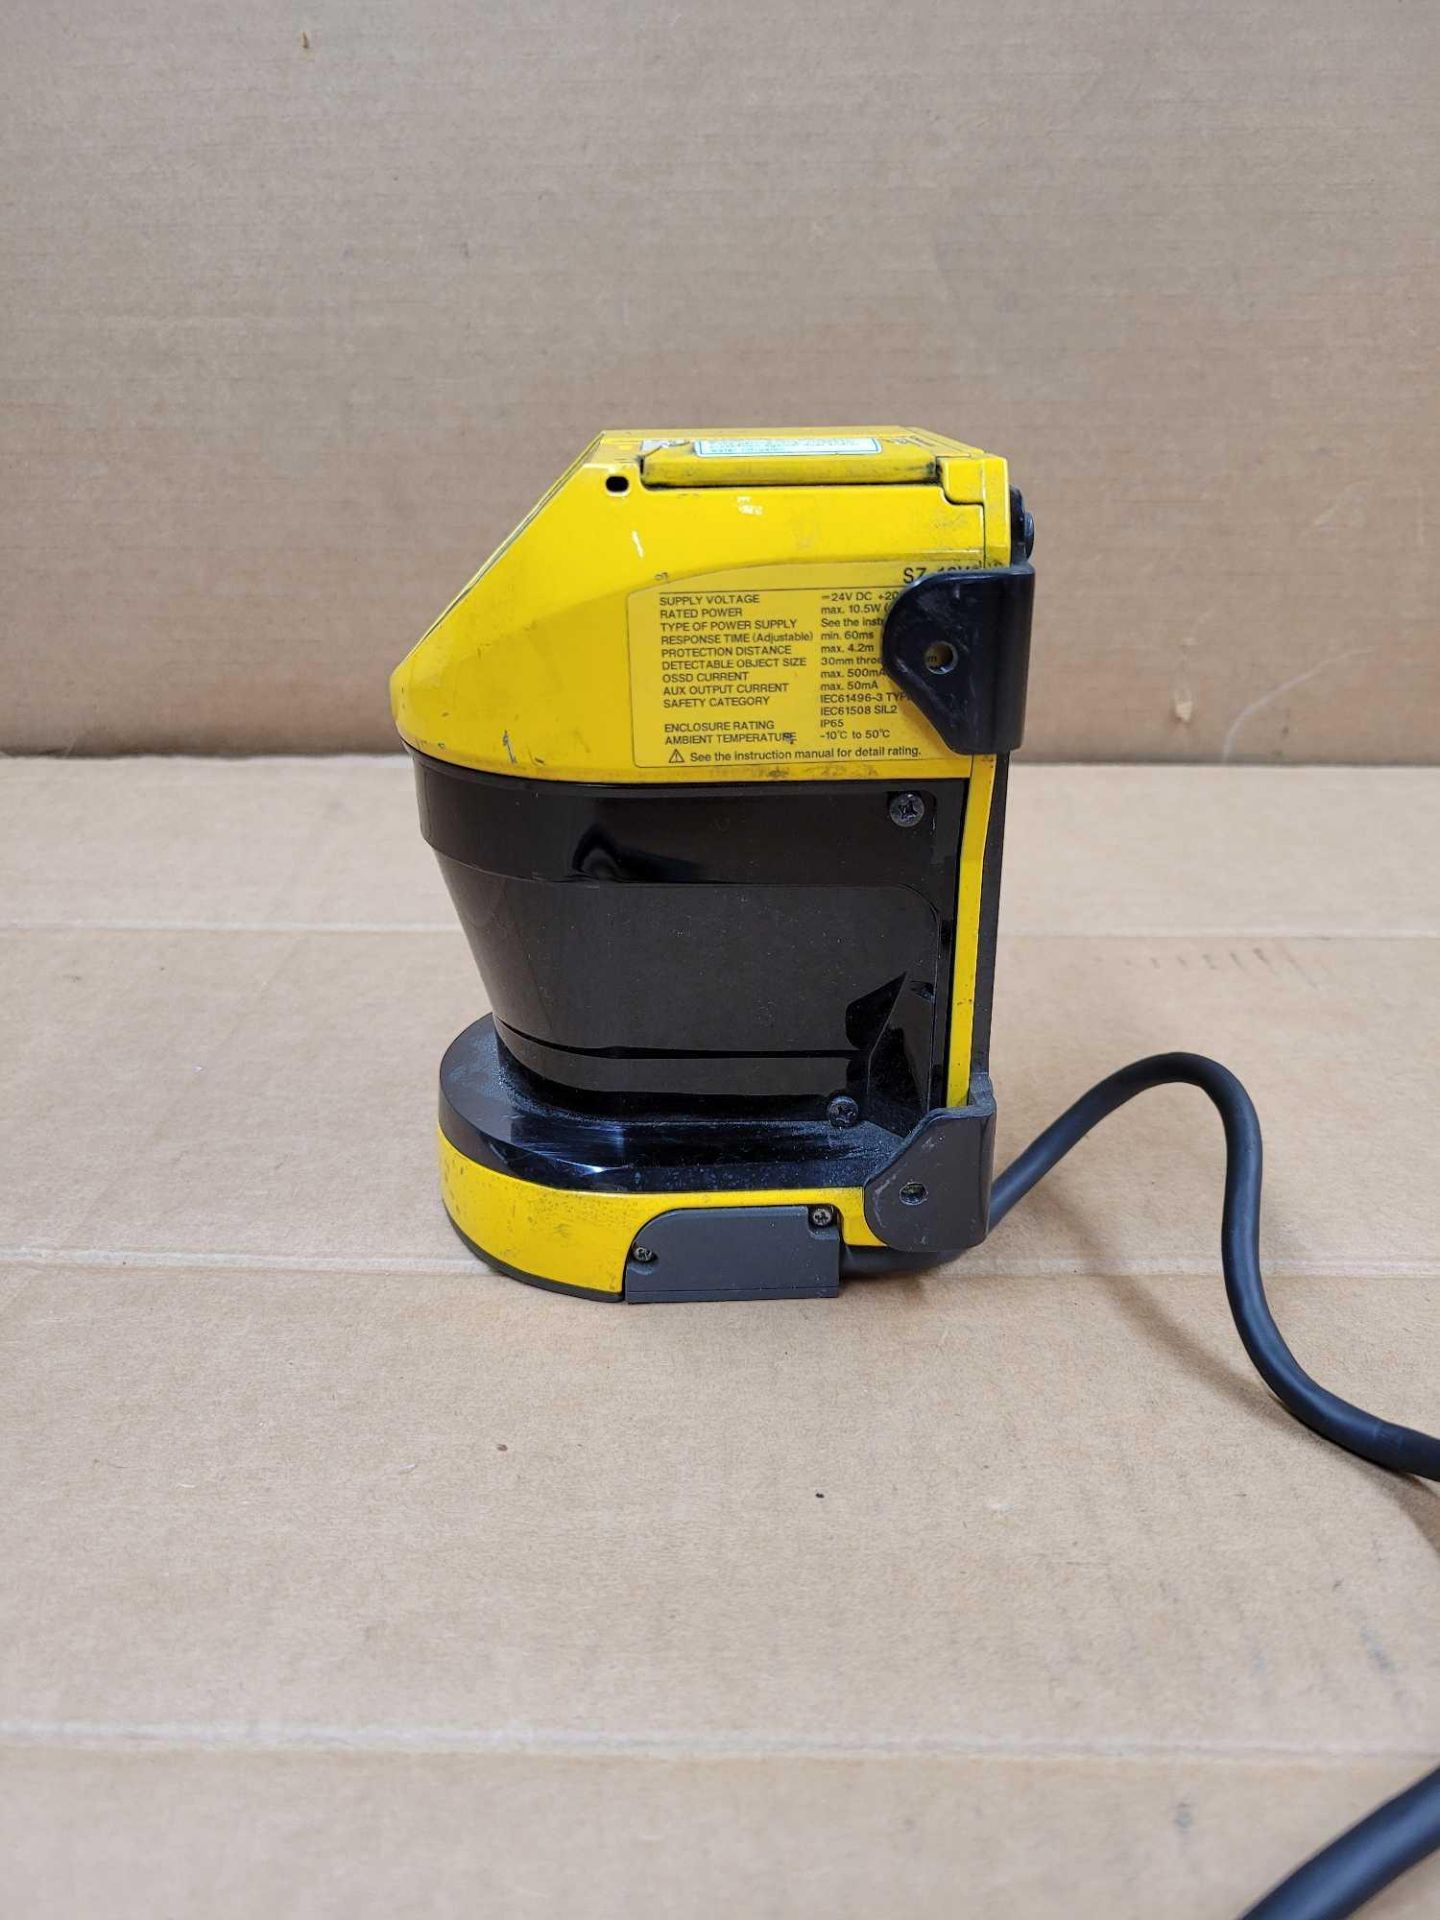 KEYENCE SZ-16V / Safety Laser Scanner  /  Lot Weight: 4.2 lbs - Image 6 of 8